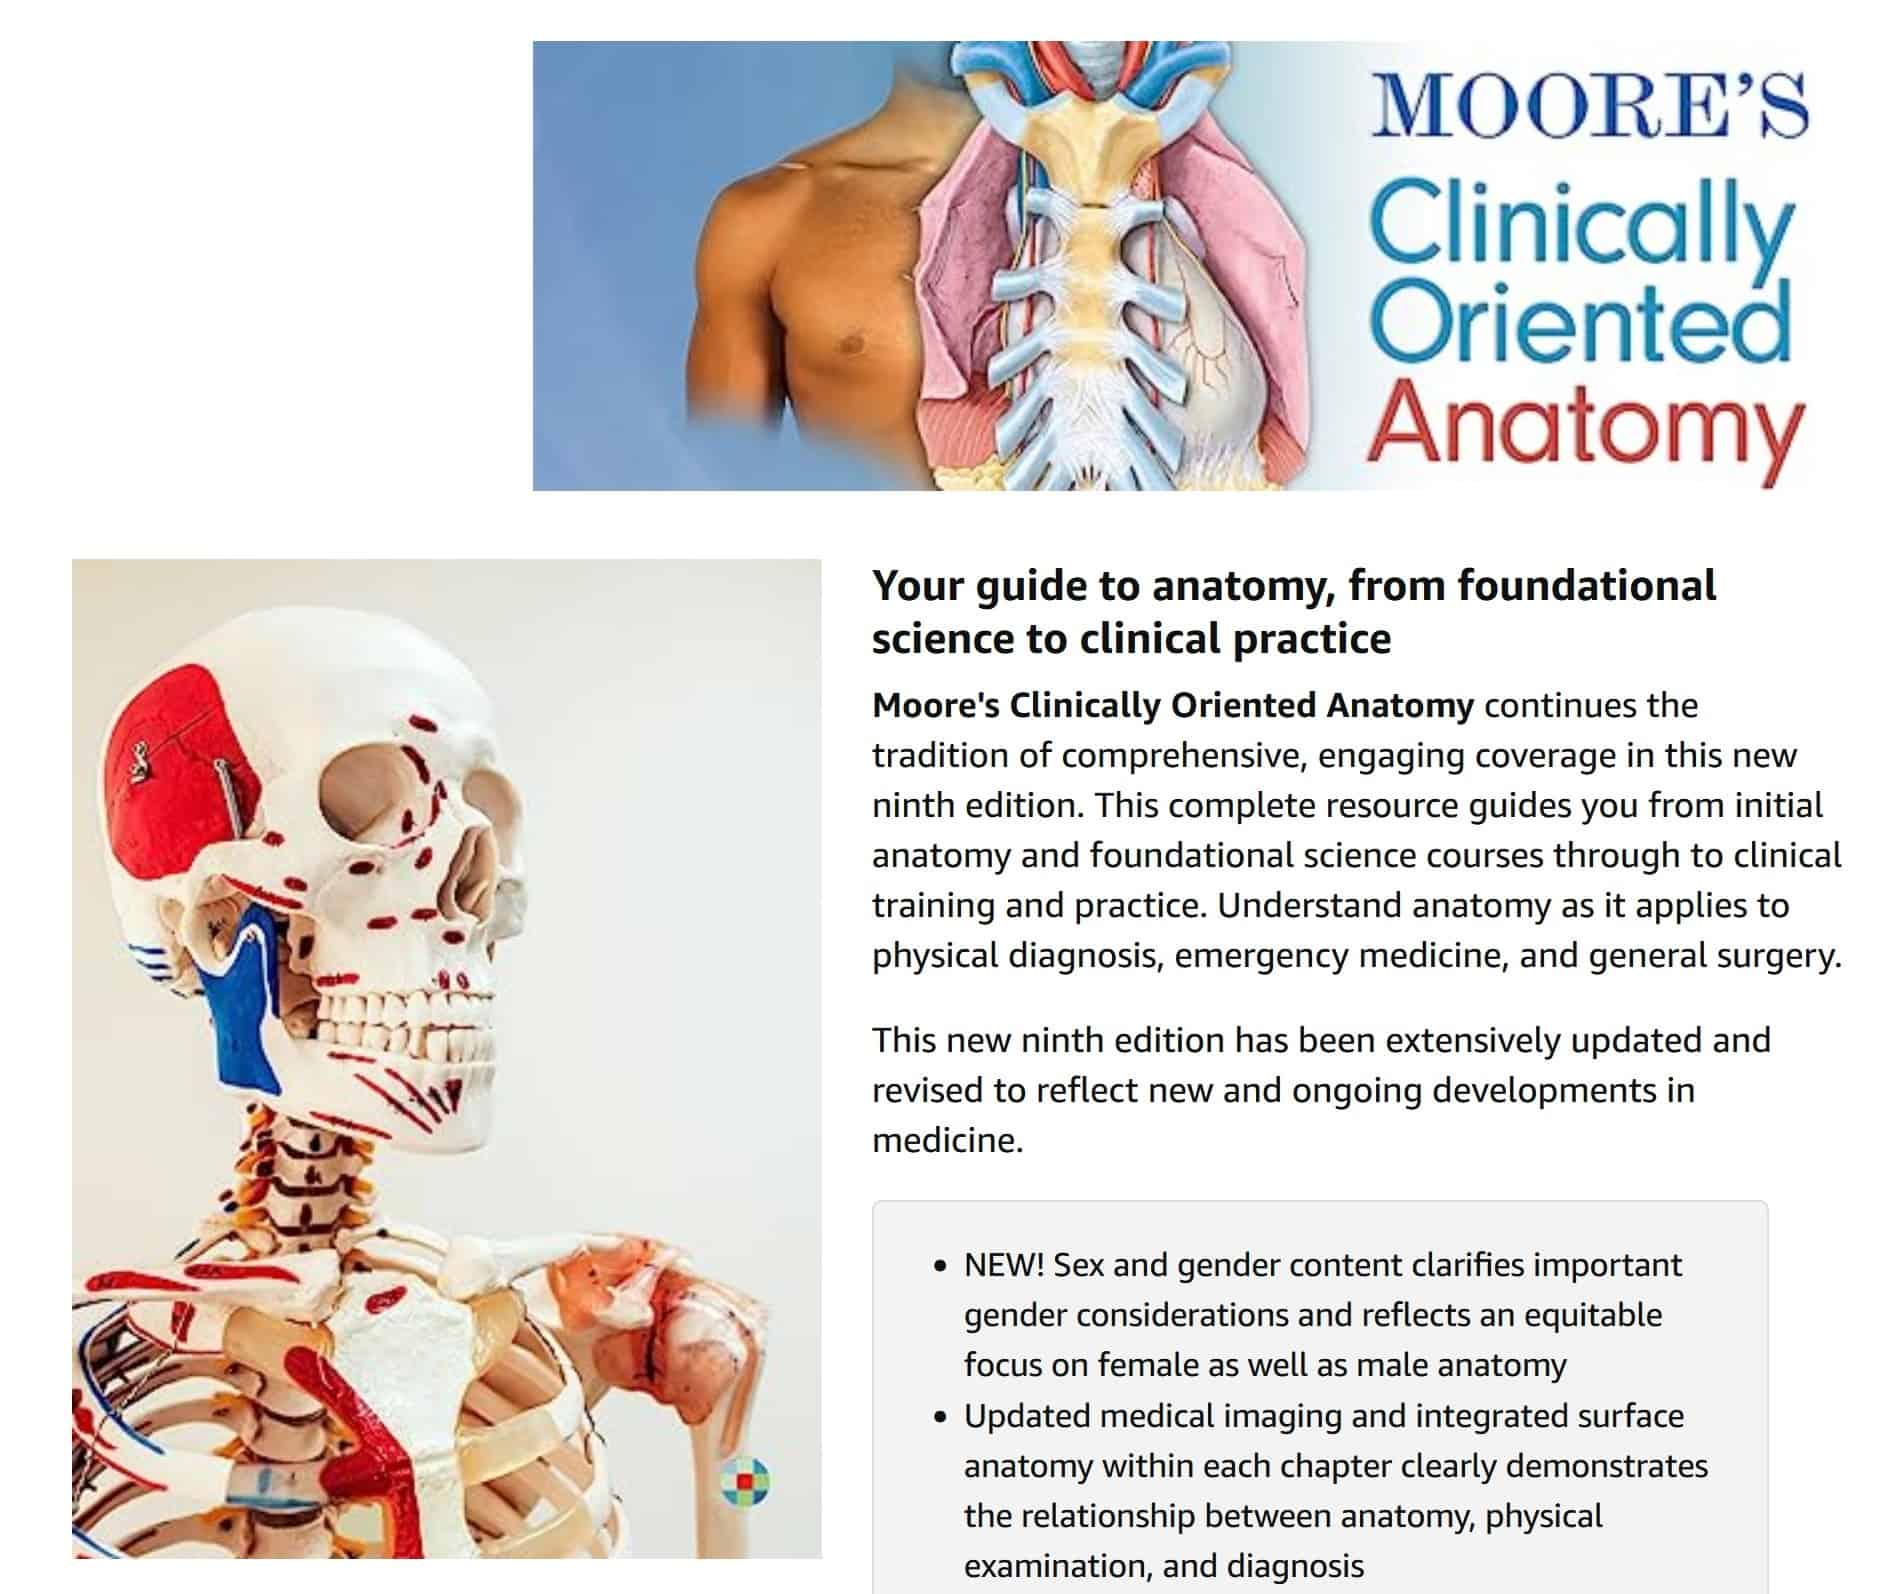 moores clinicaly oriented anatomy 9e